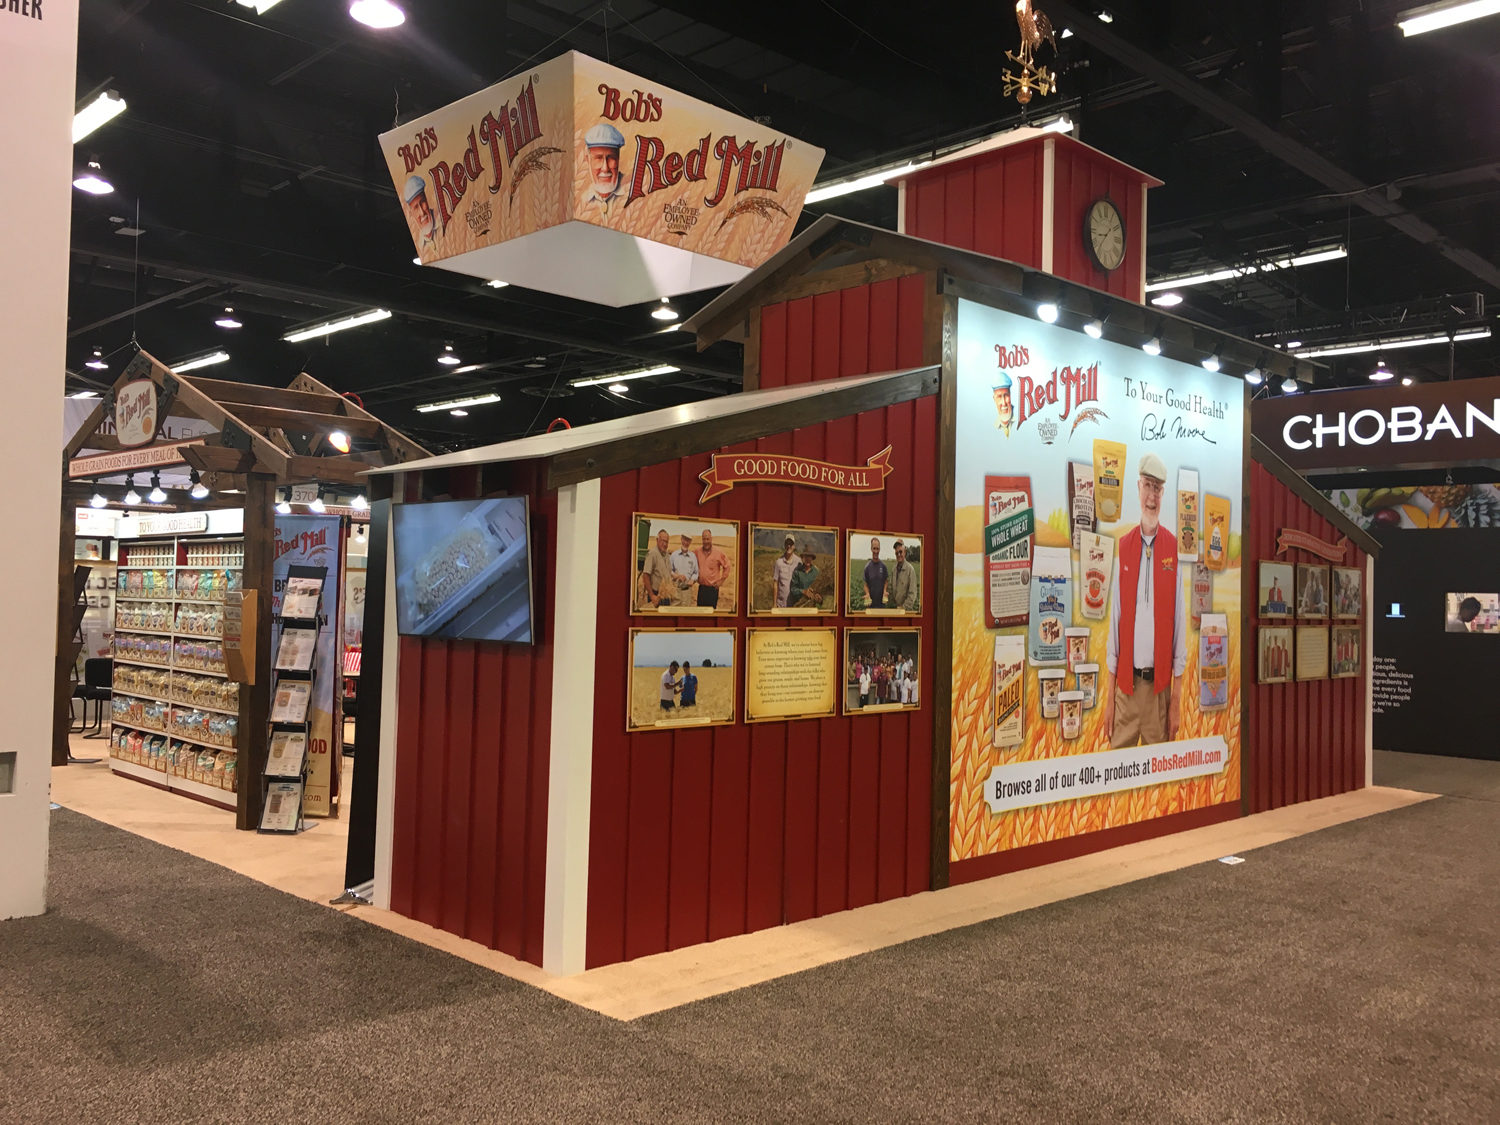 How to Stand Out at a Tradeshow - TradeshowGuy Blog